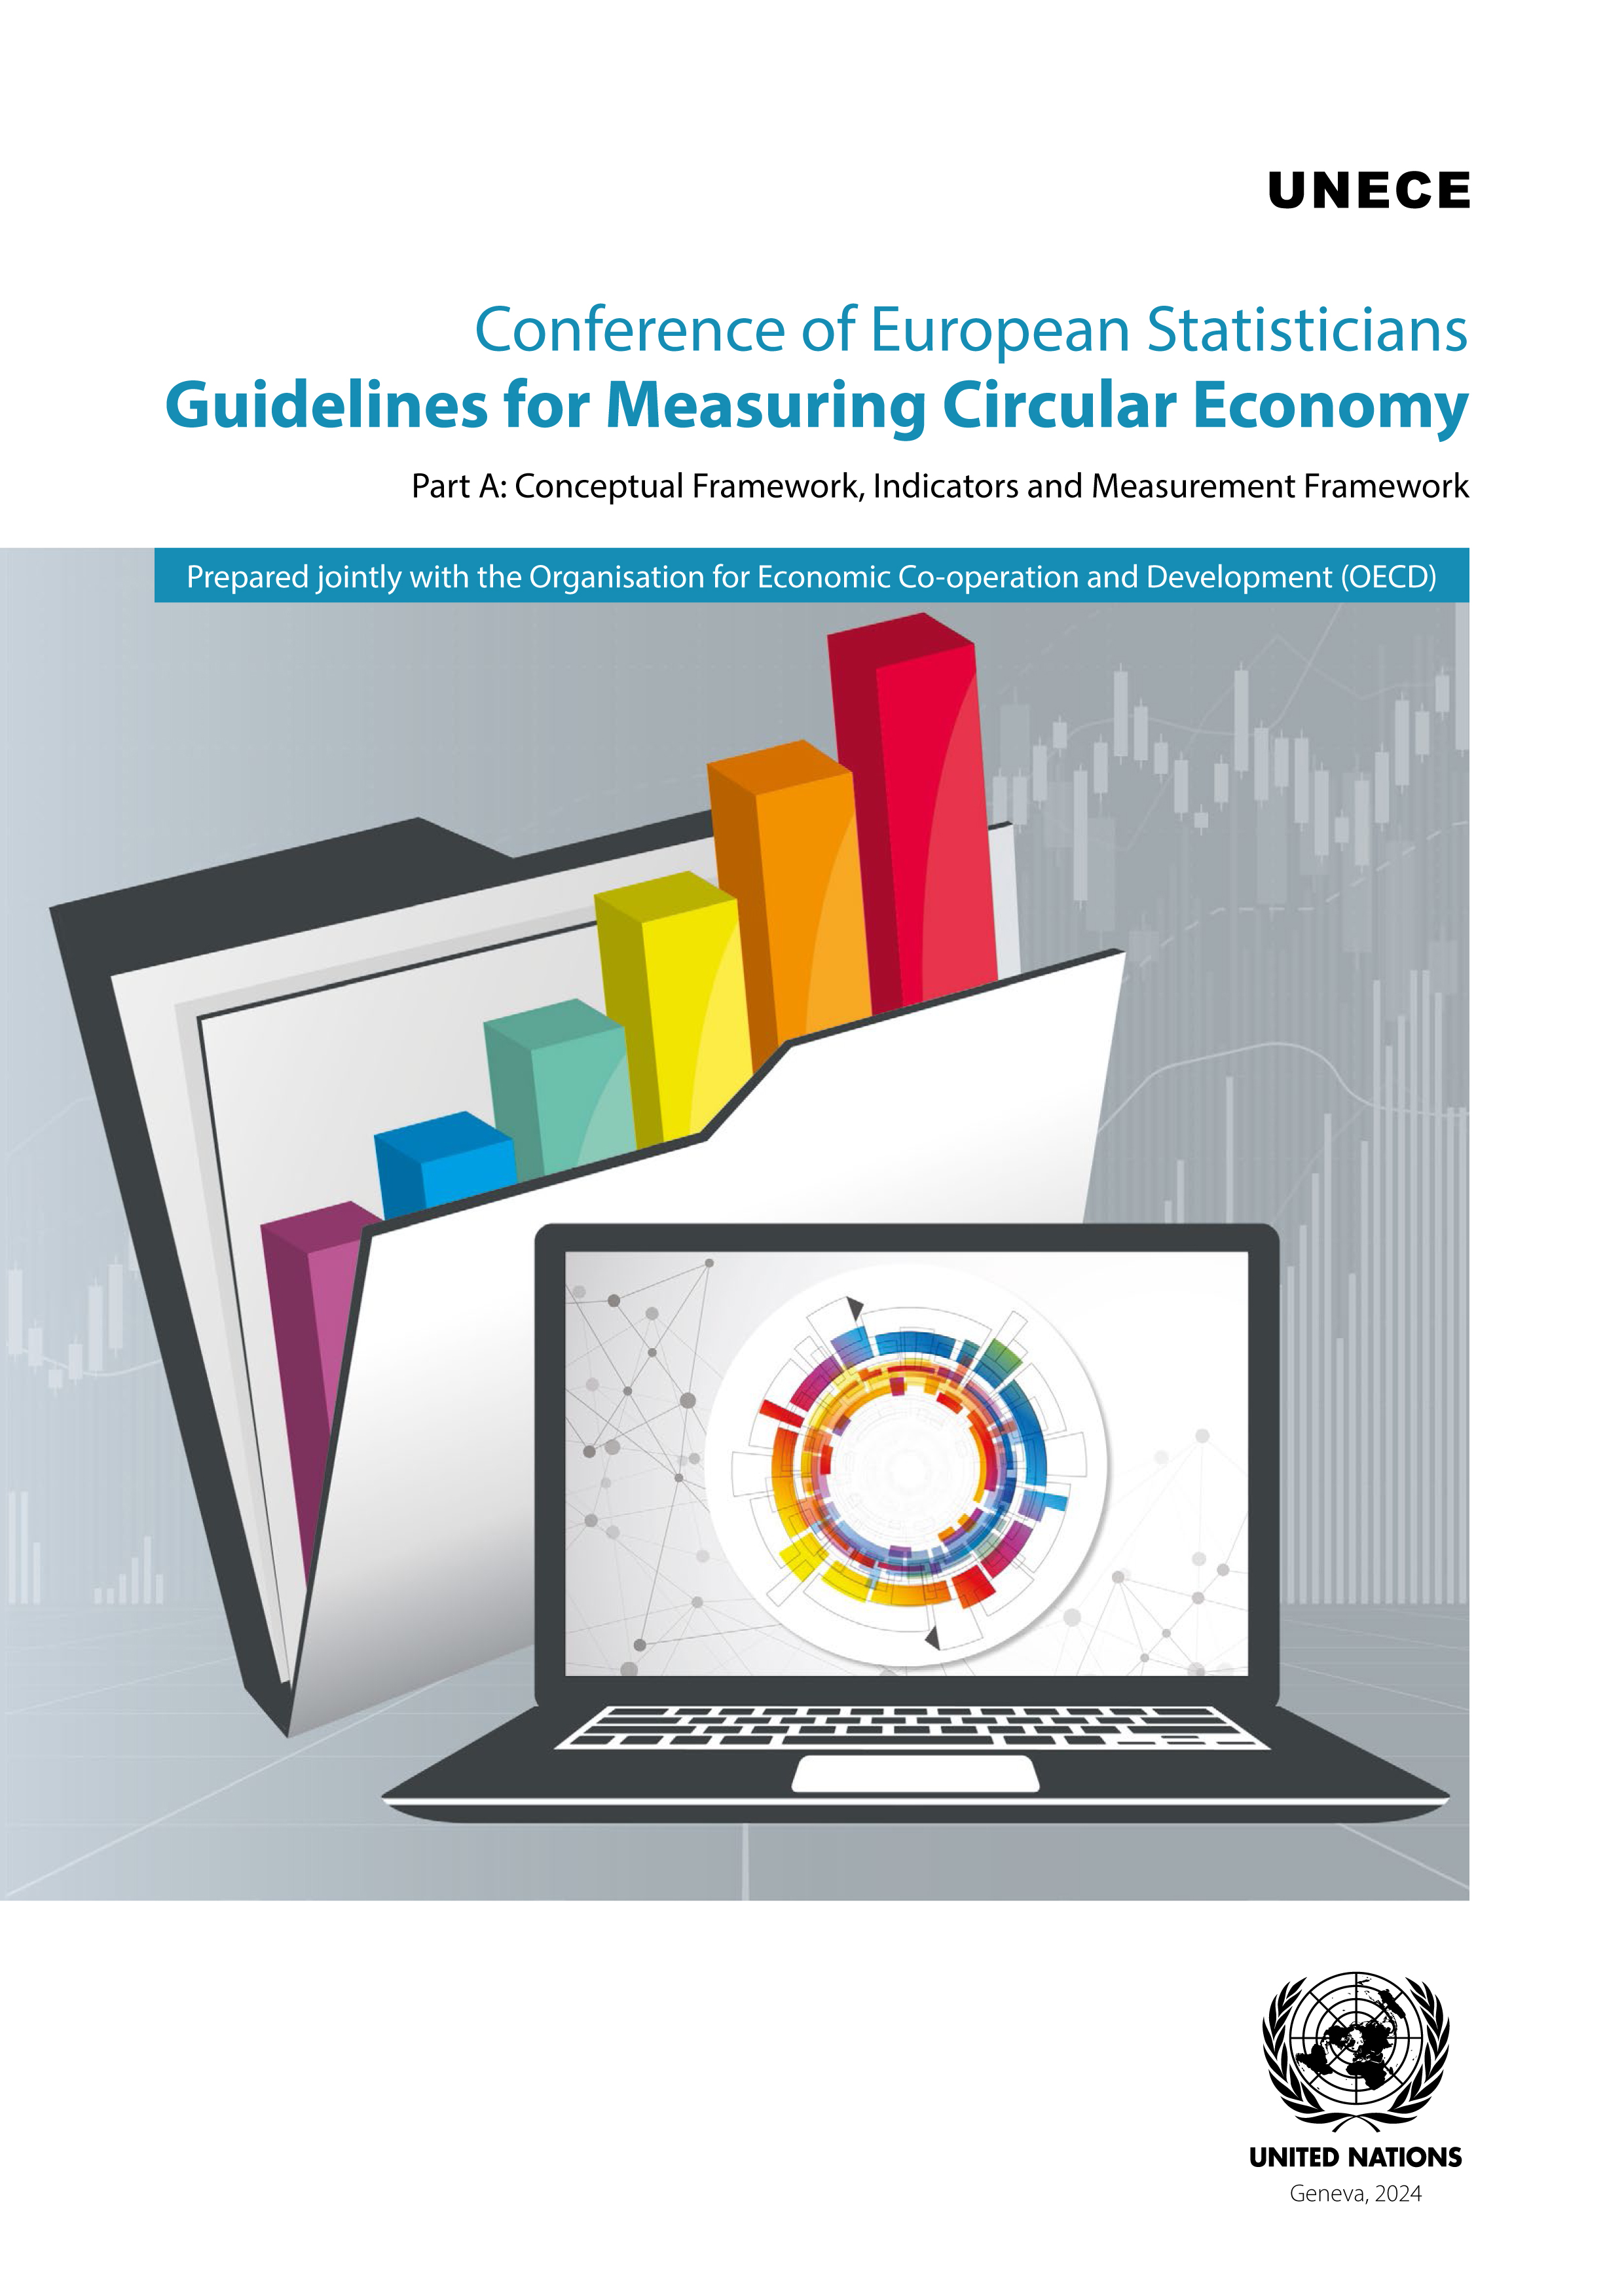 image of Conference of European Statisticians' Guidelines for Measuring Circular Economy